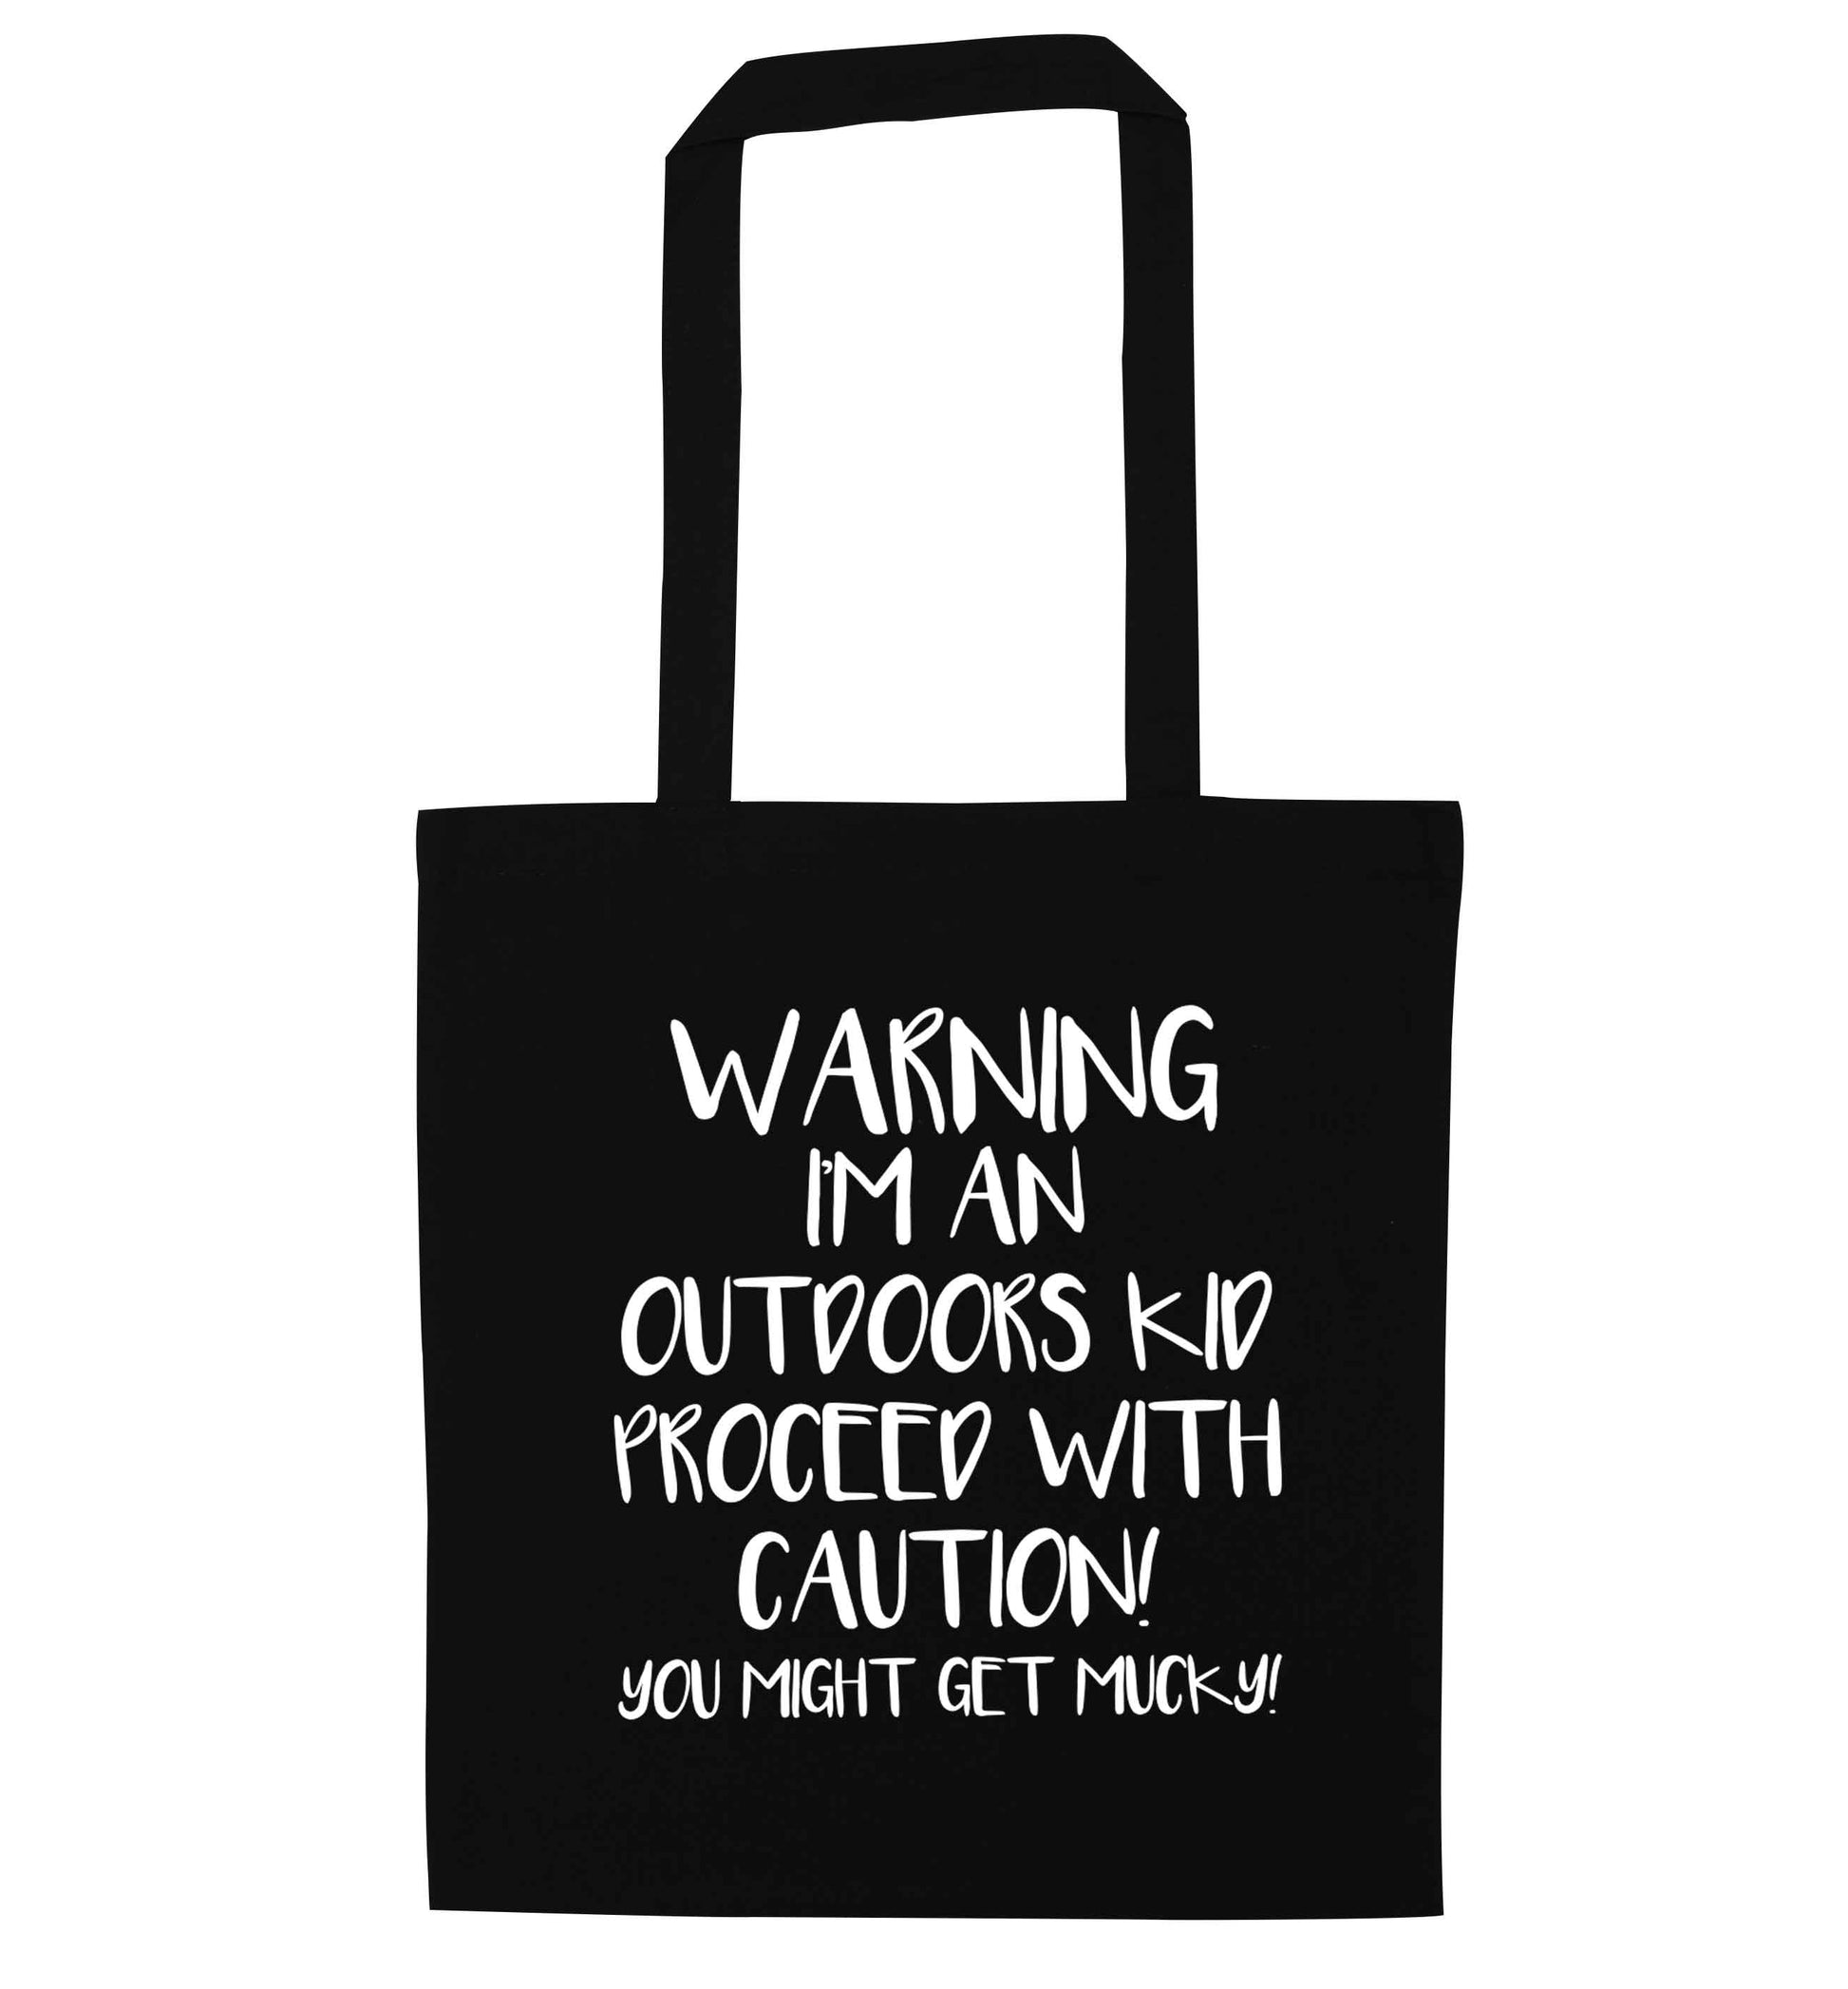 Warning I'm an outdoors kid! Proceed with caution you might get mucky black tote bag